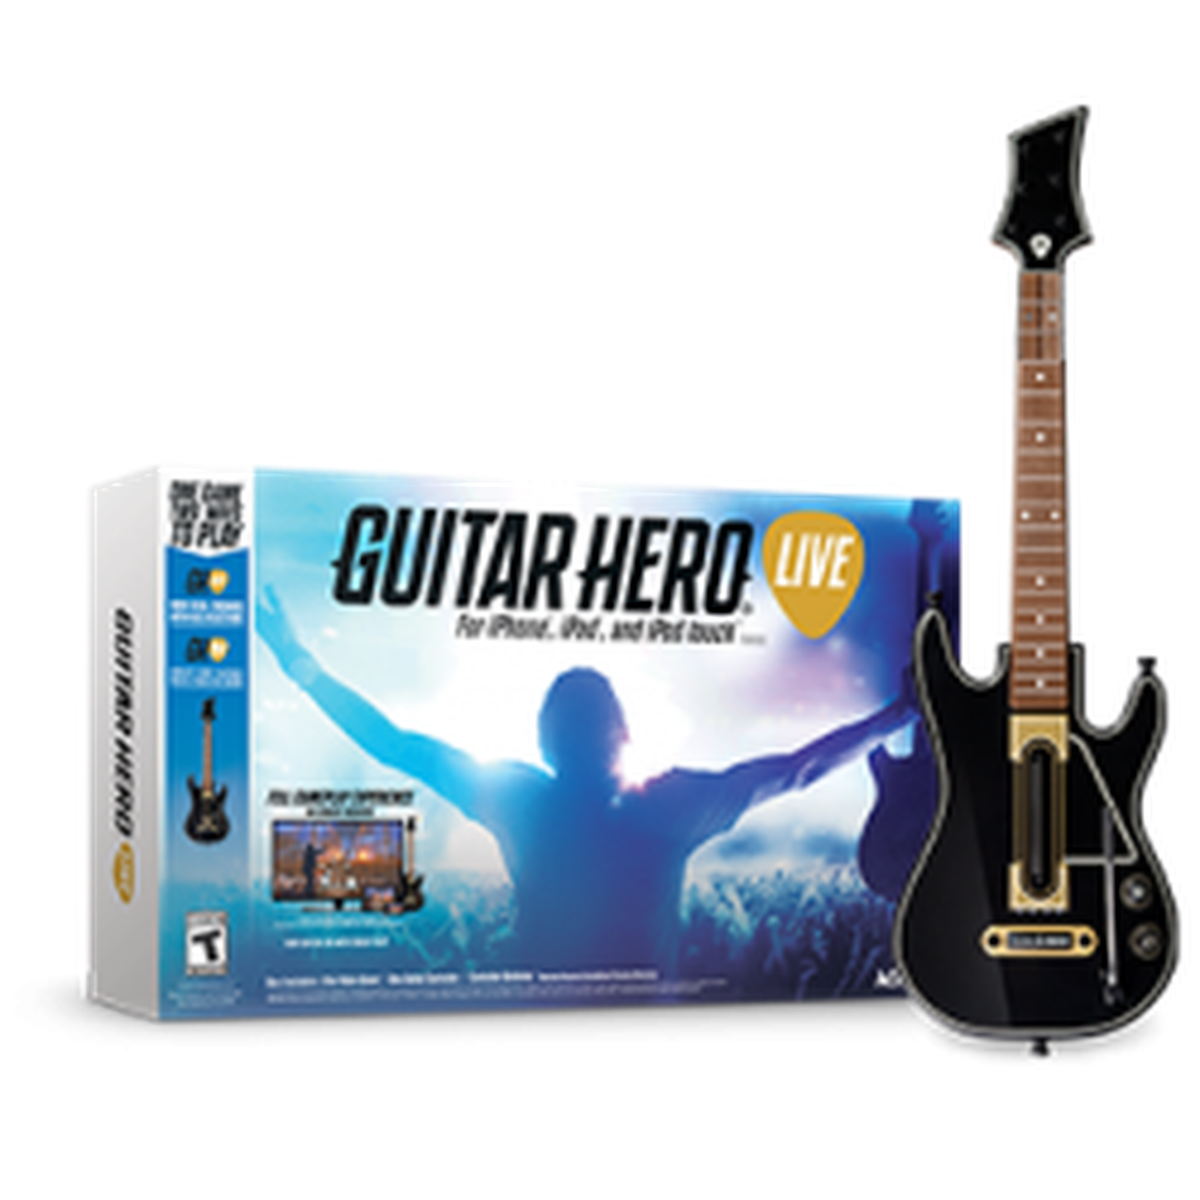 More Realistic Guitar Hero In Development for Xbox One, PS4